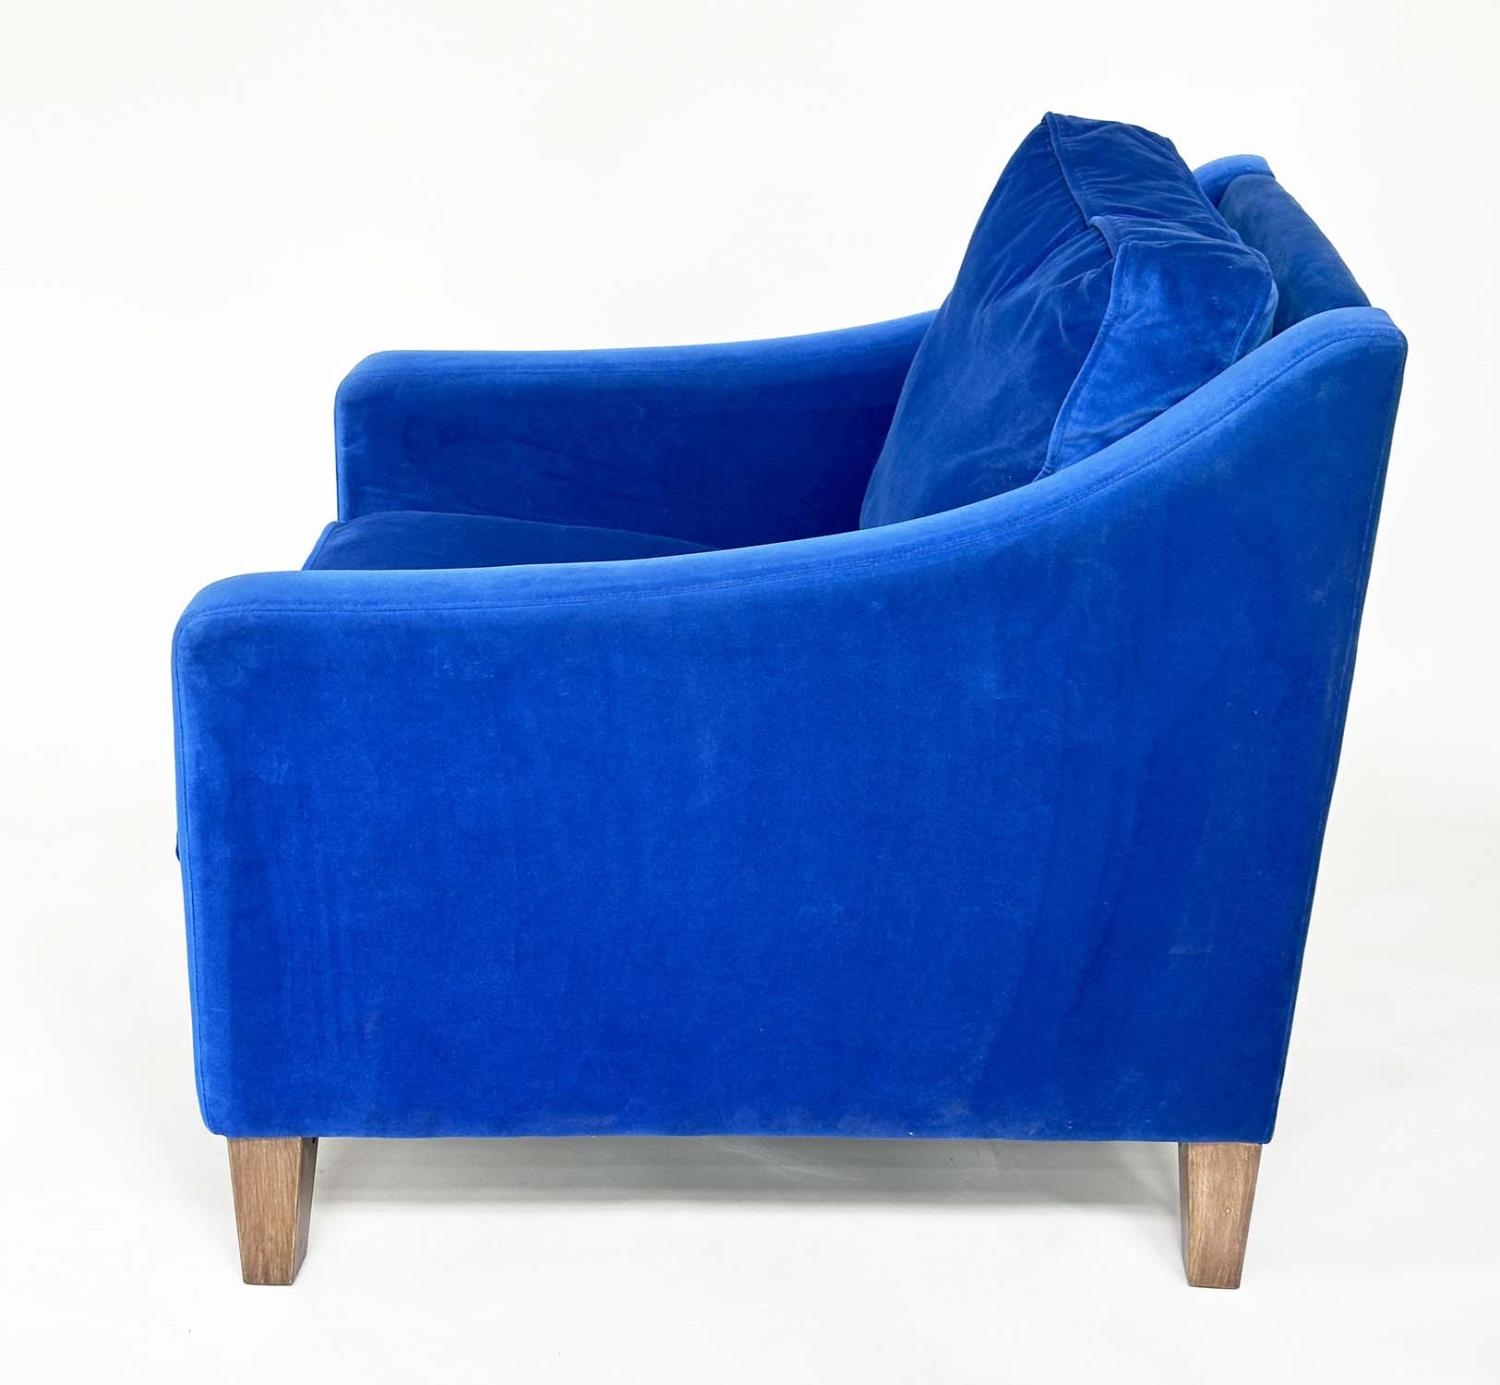 ARMCHAIR, traditional, blue velvet upholstered with soft cushions and tapering supports, Sofa.com, - Image 7 of 11